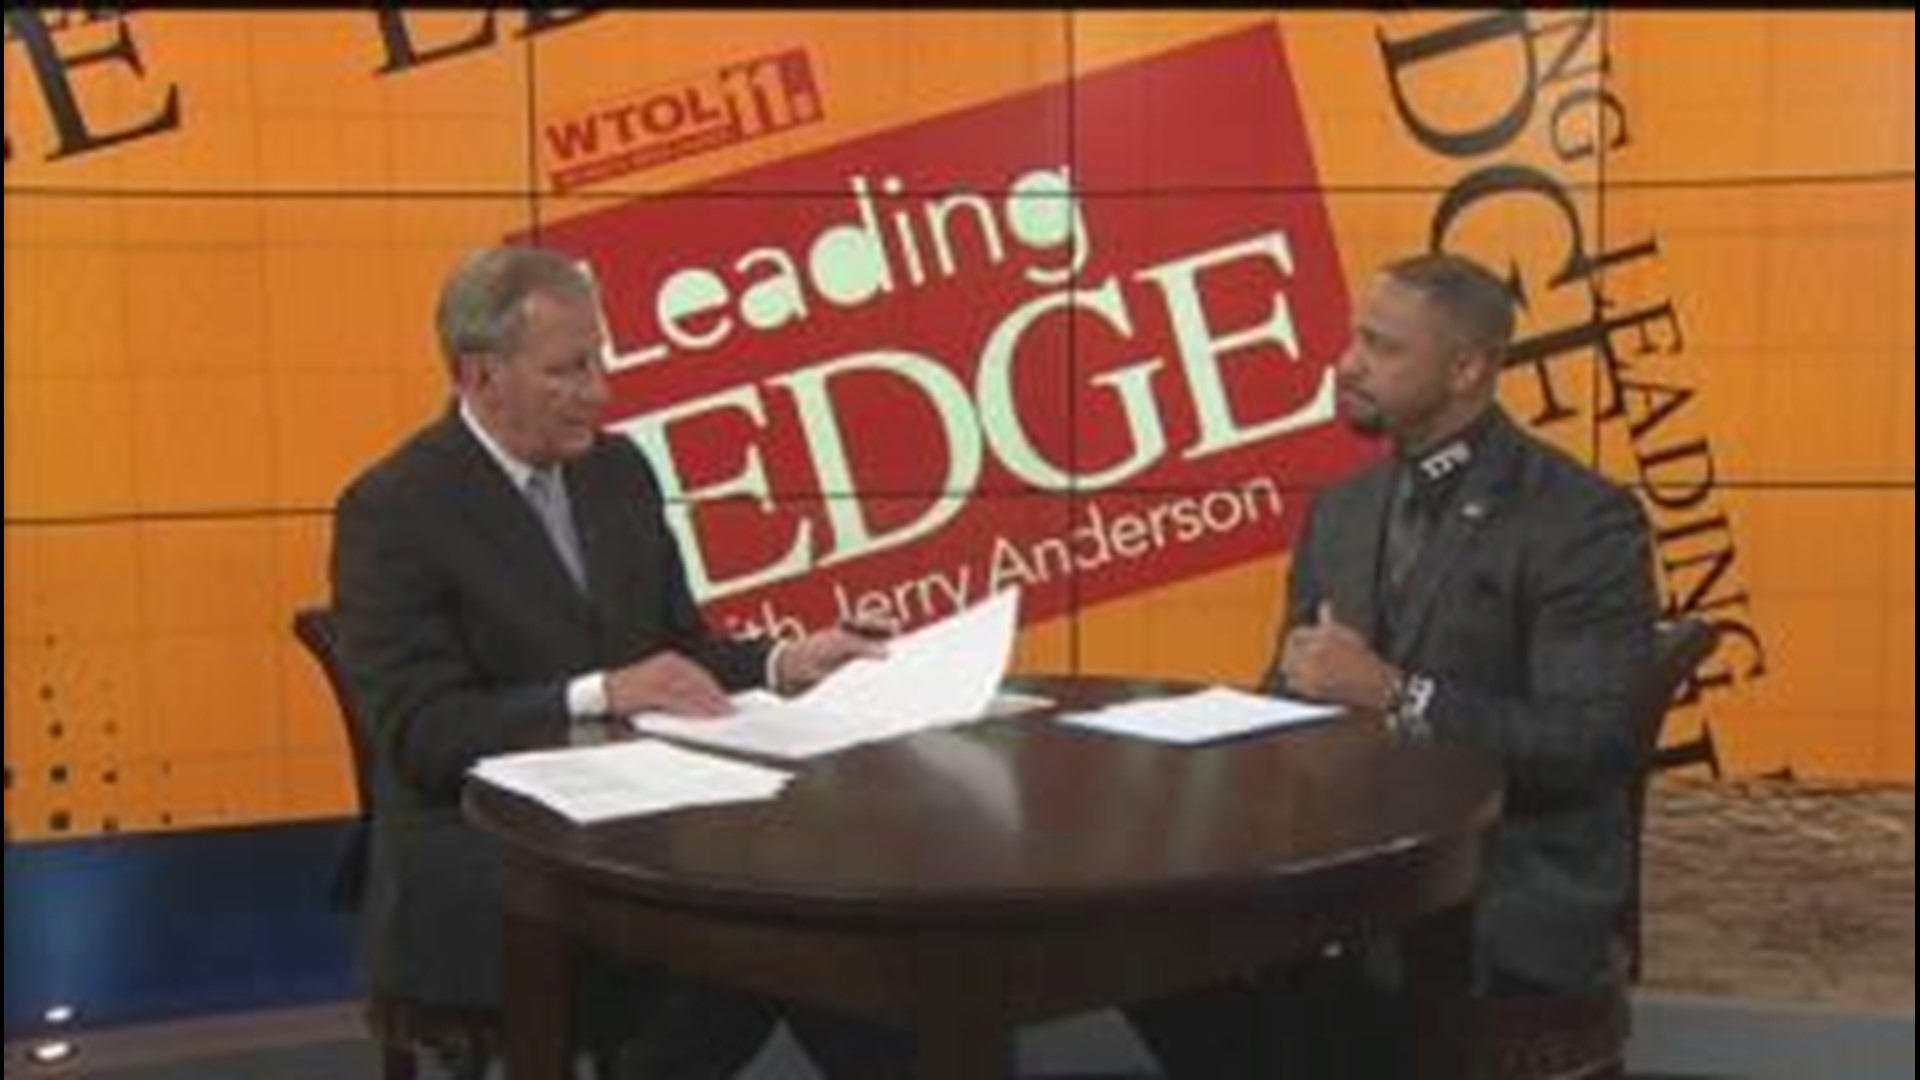 Oct. 15: Leading Edge with Jerry Anderson - Part 3